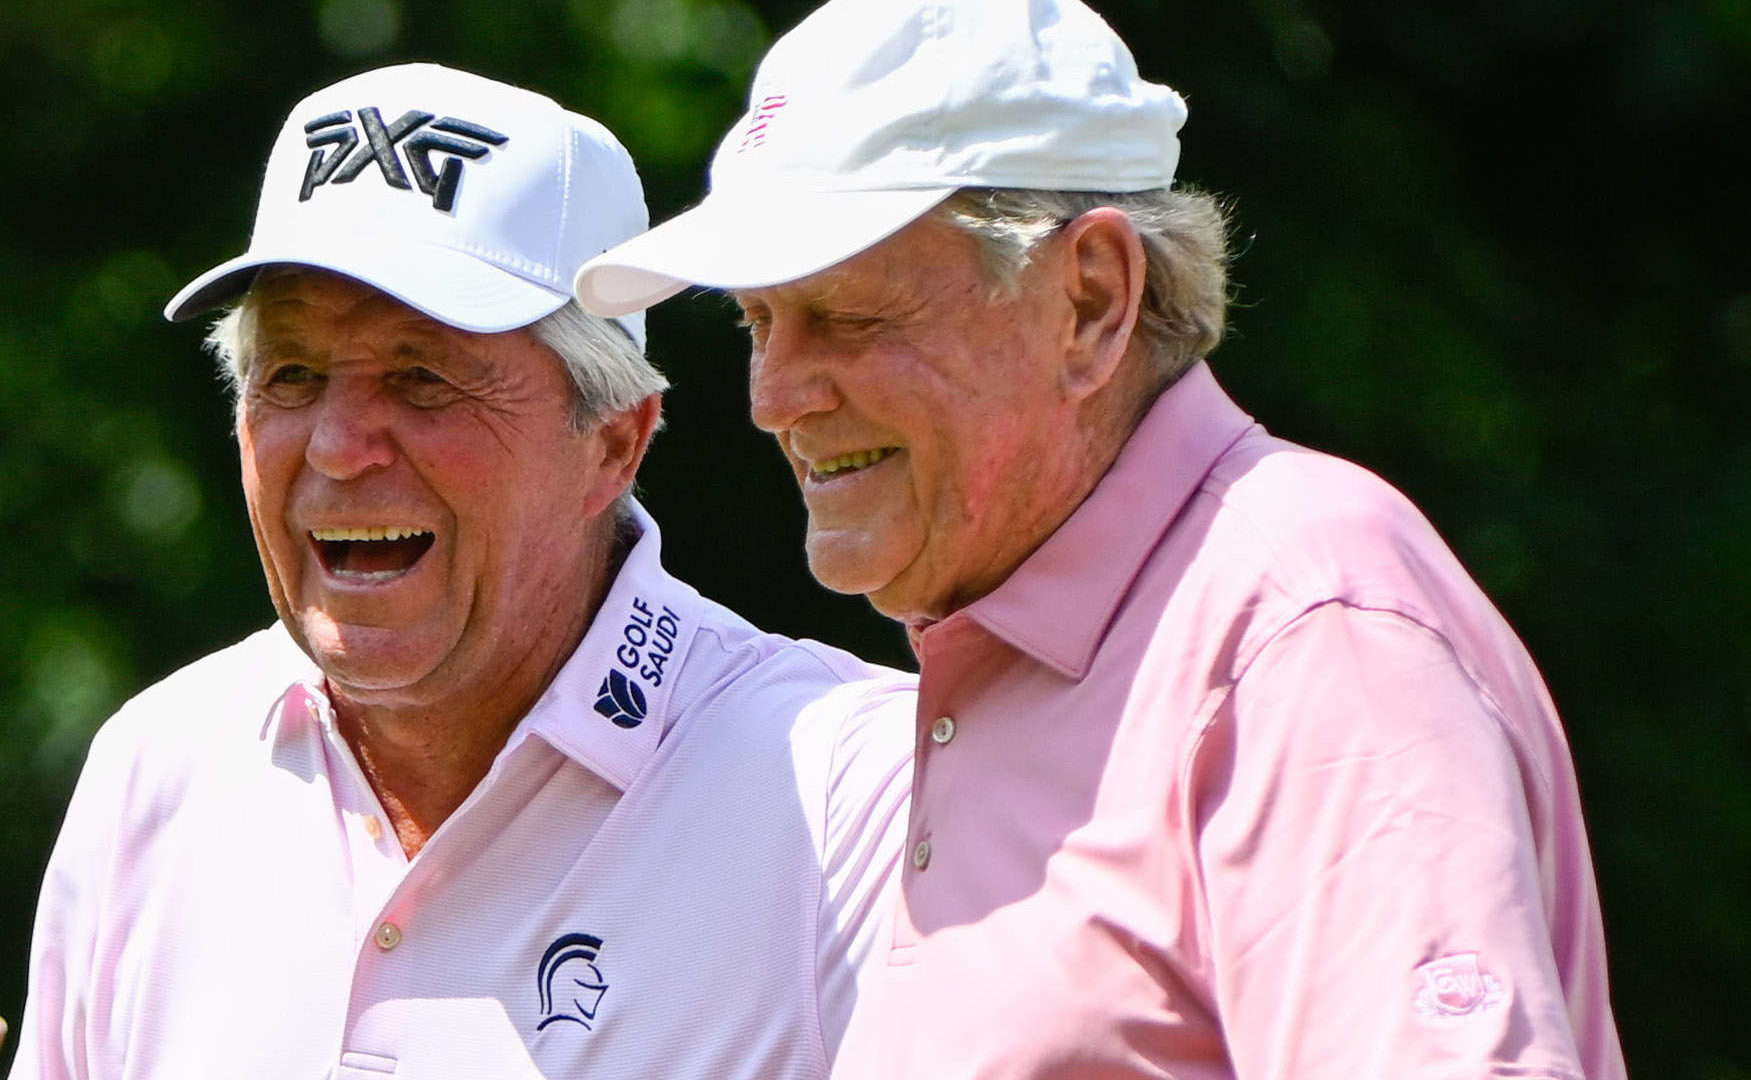 THE WOODLANDS, TX - APRIL 30: Gary Player celebrates with Jack Nicklaus after sinking his birdie putt on 10 during the 3M Greats of Golf during Rd2 of the Insperity Invitational at The Woodlands Country Club on April 30, 2022 in The Woodlands, TX (Photo by Ken Murray/Icon Sportswire)